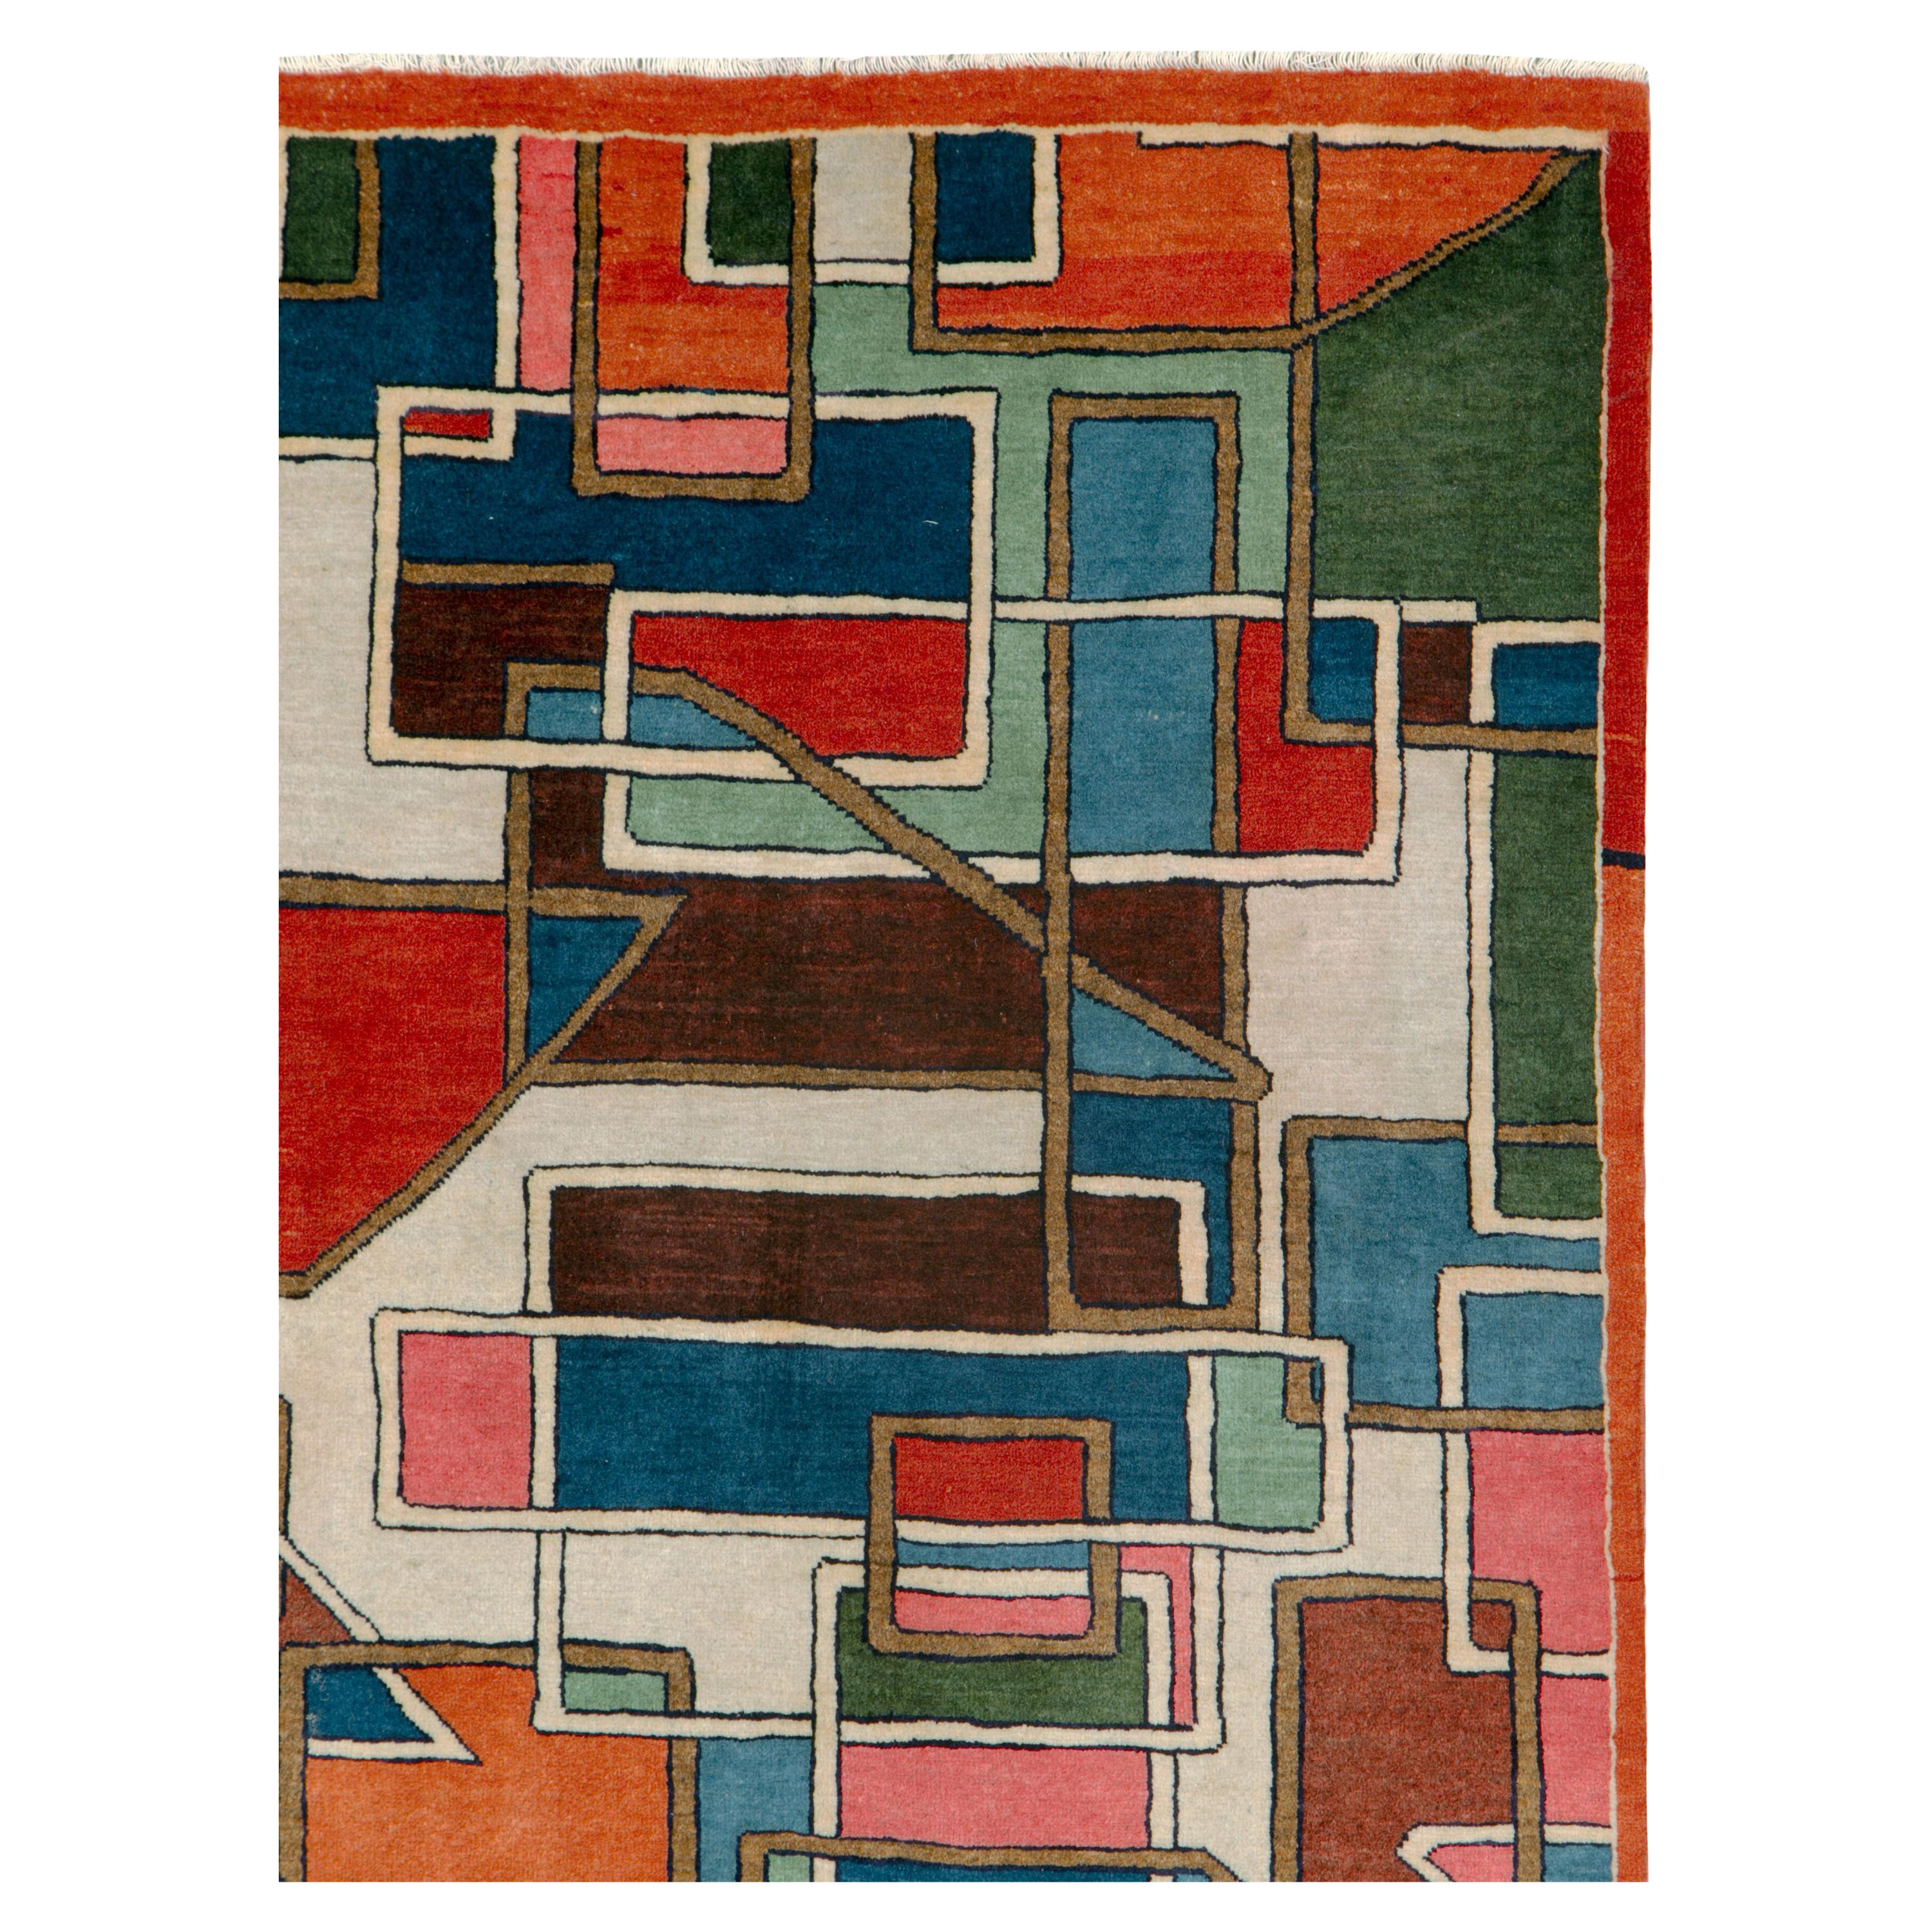 A vintage Persian Sarouk rug with an Art Deco design from the mid-20th century.